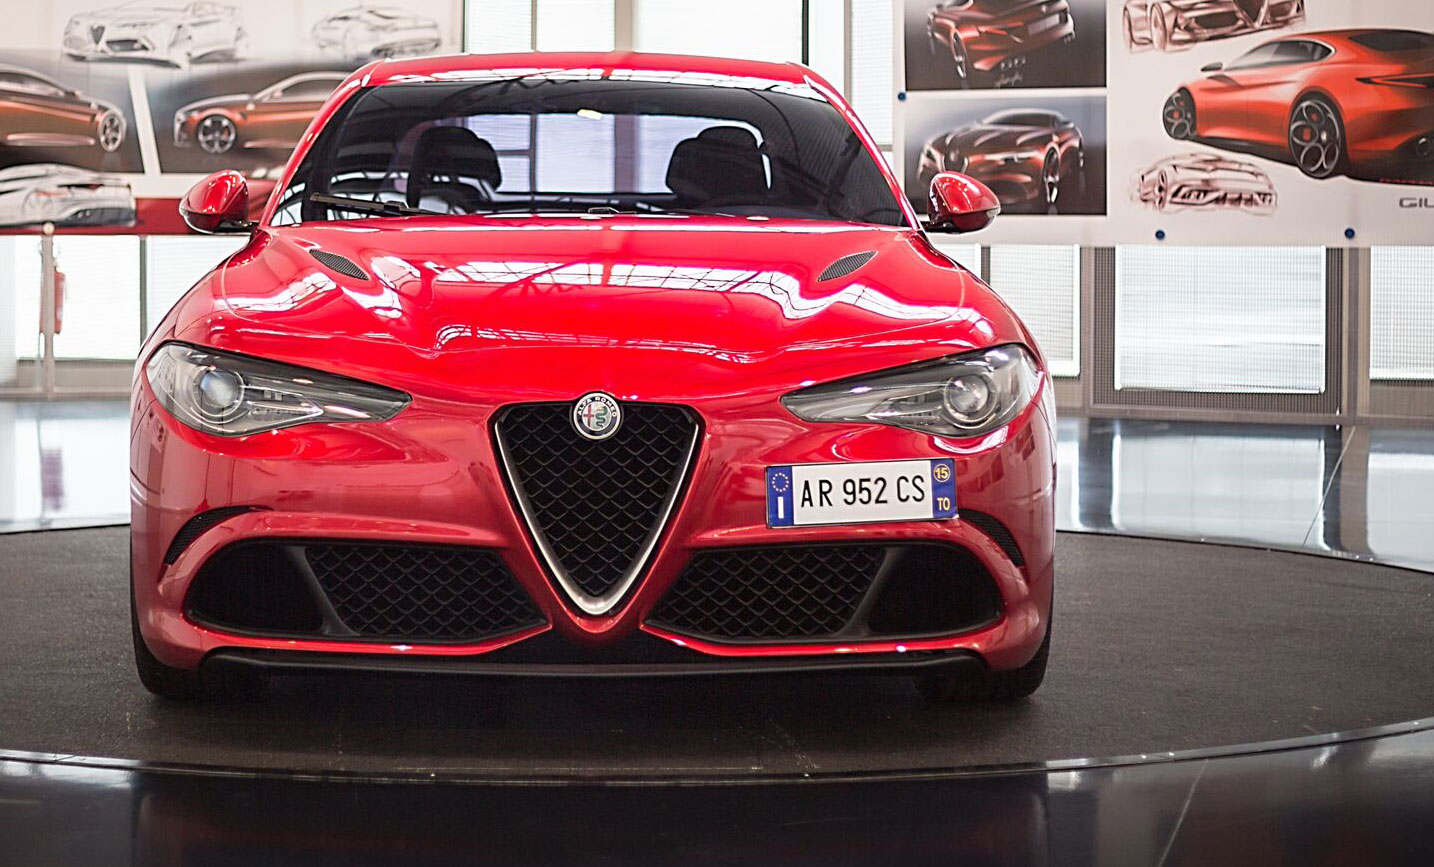 Inside The Incredible Automotive Innovations Of One Italian Company